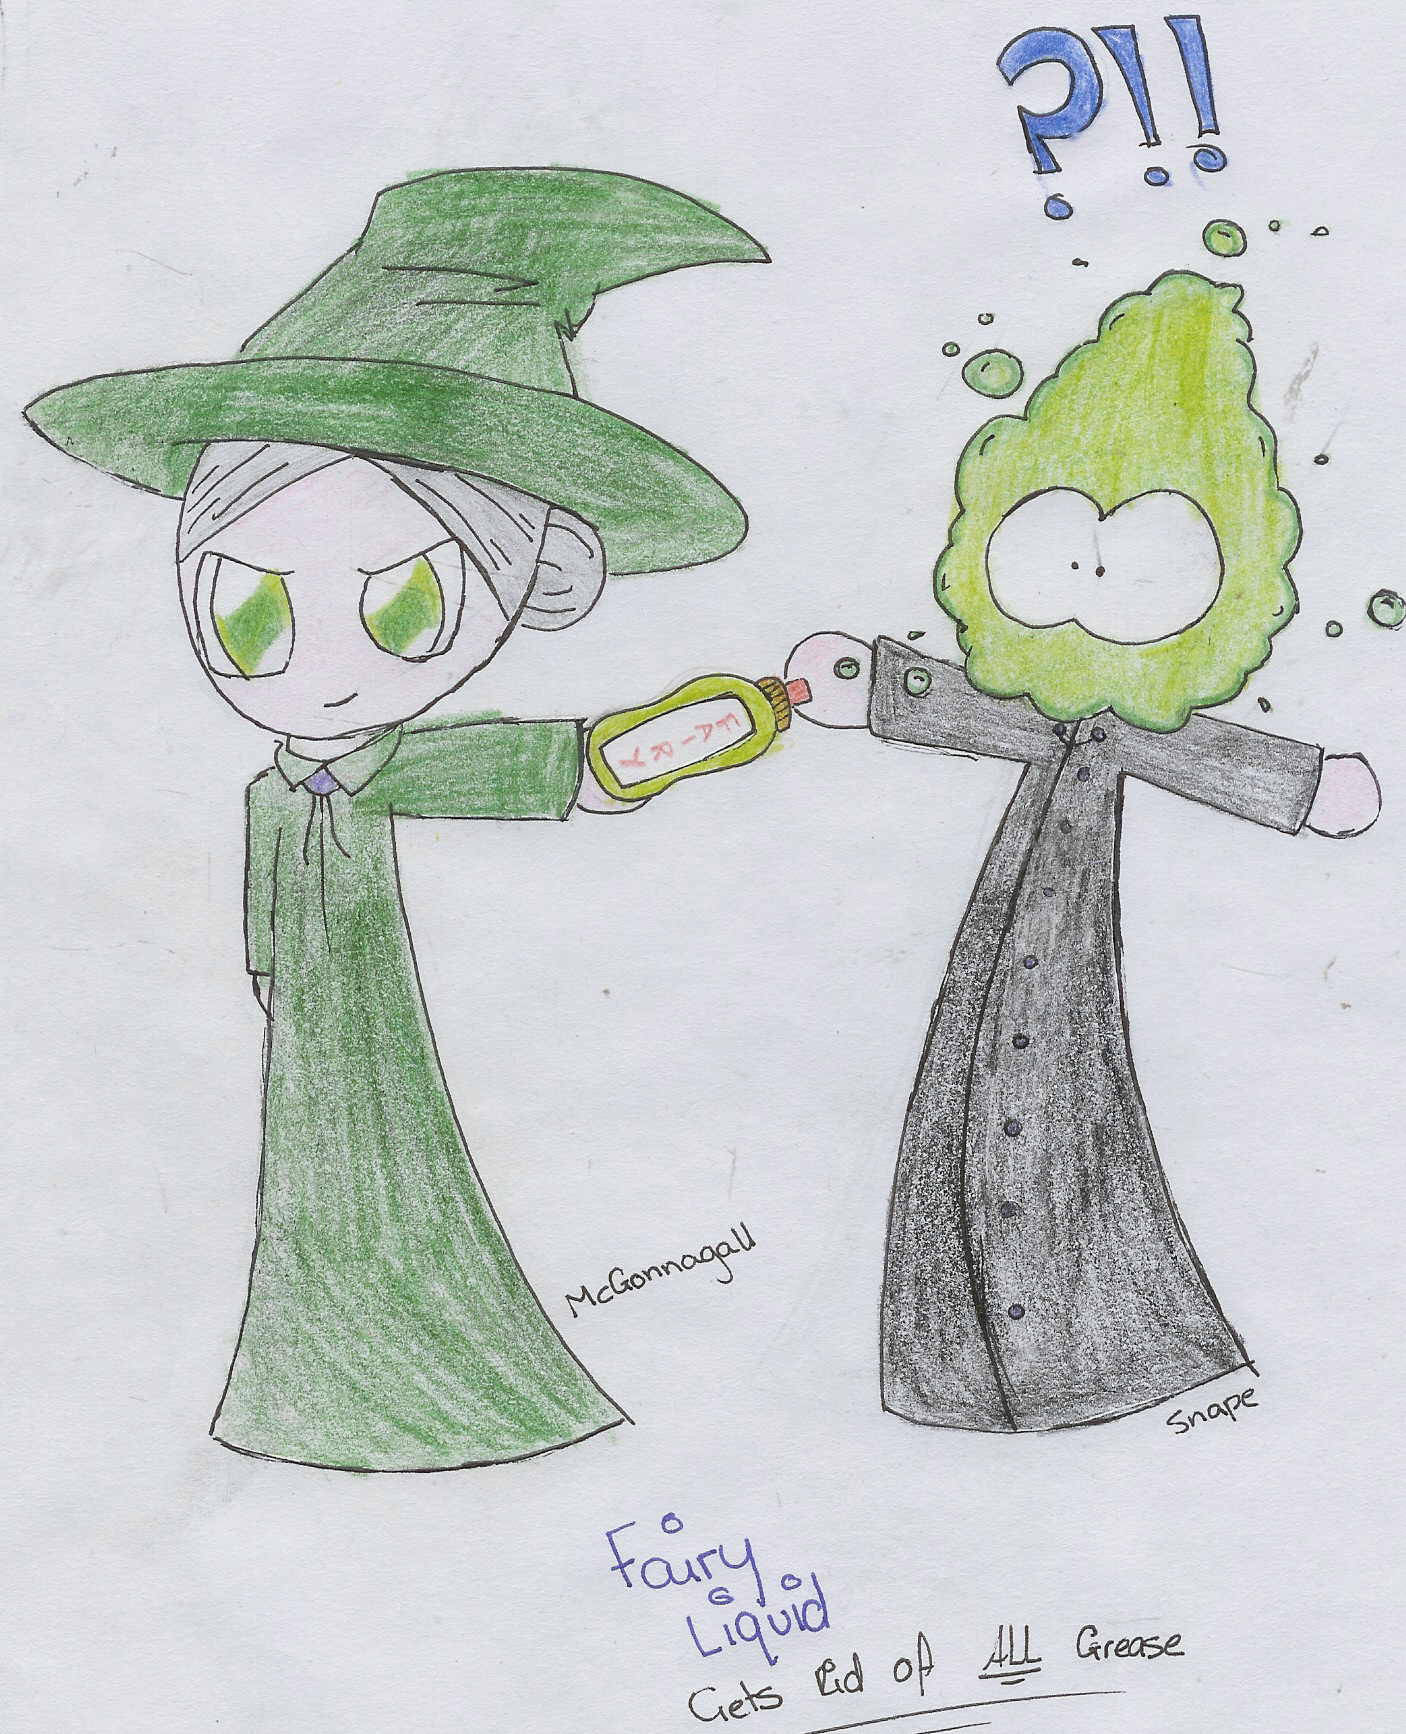 Buy Fairy" Says McGonagall by Knuckles_prower168